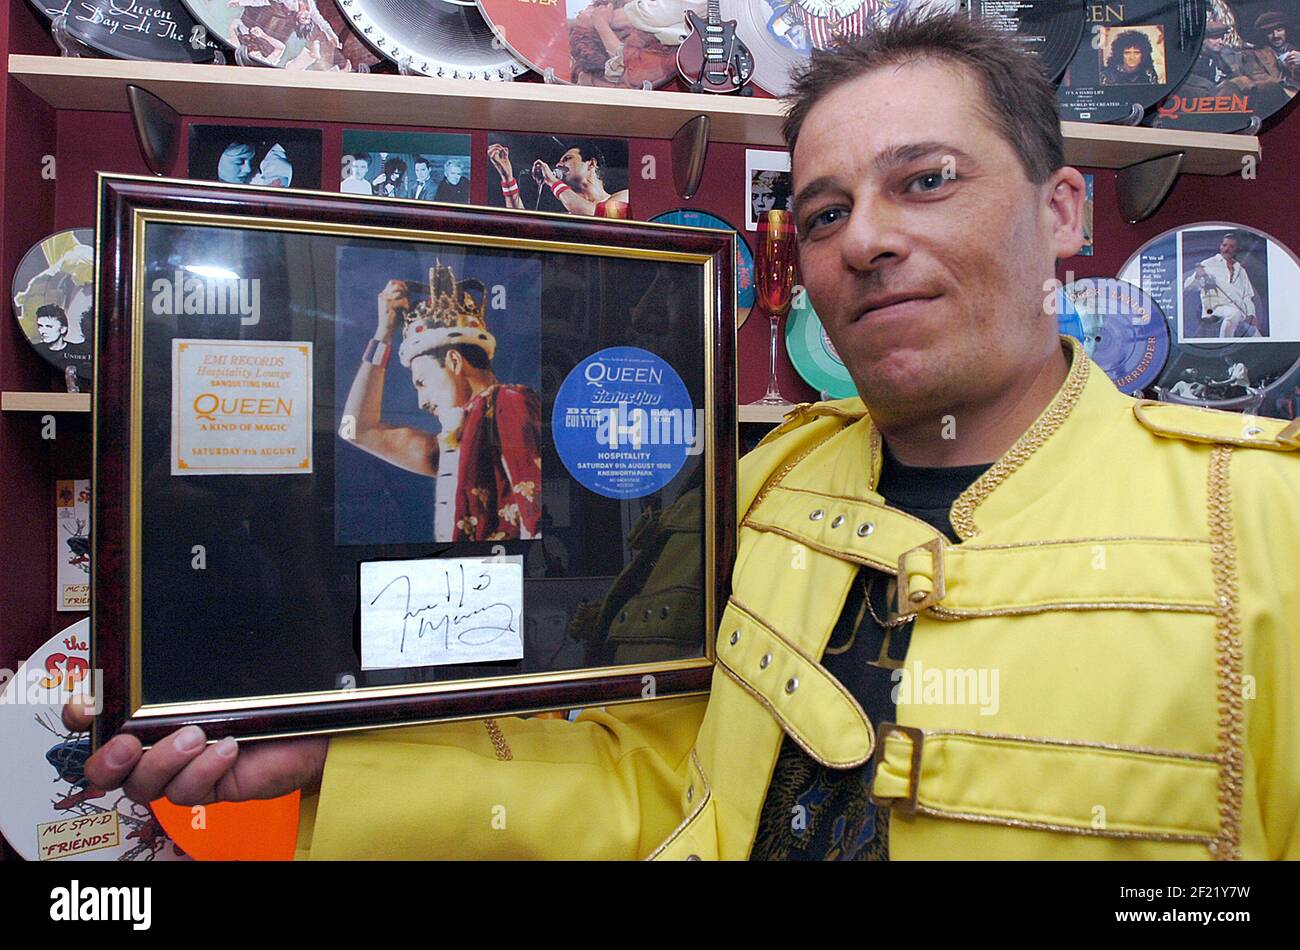 The no.1 fan of rock legends, Queen, Andy Sparks, with his prized Freddie  Mercury autograph,